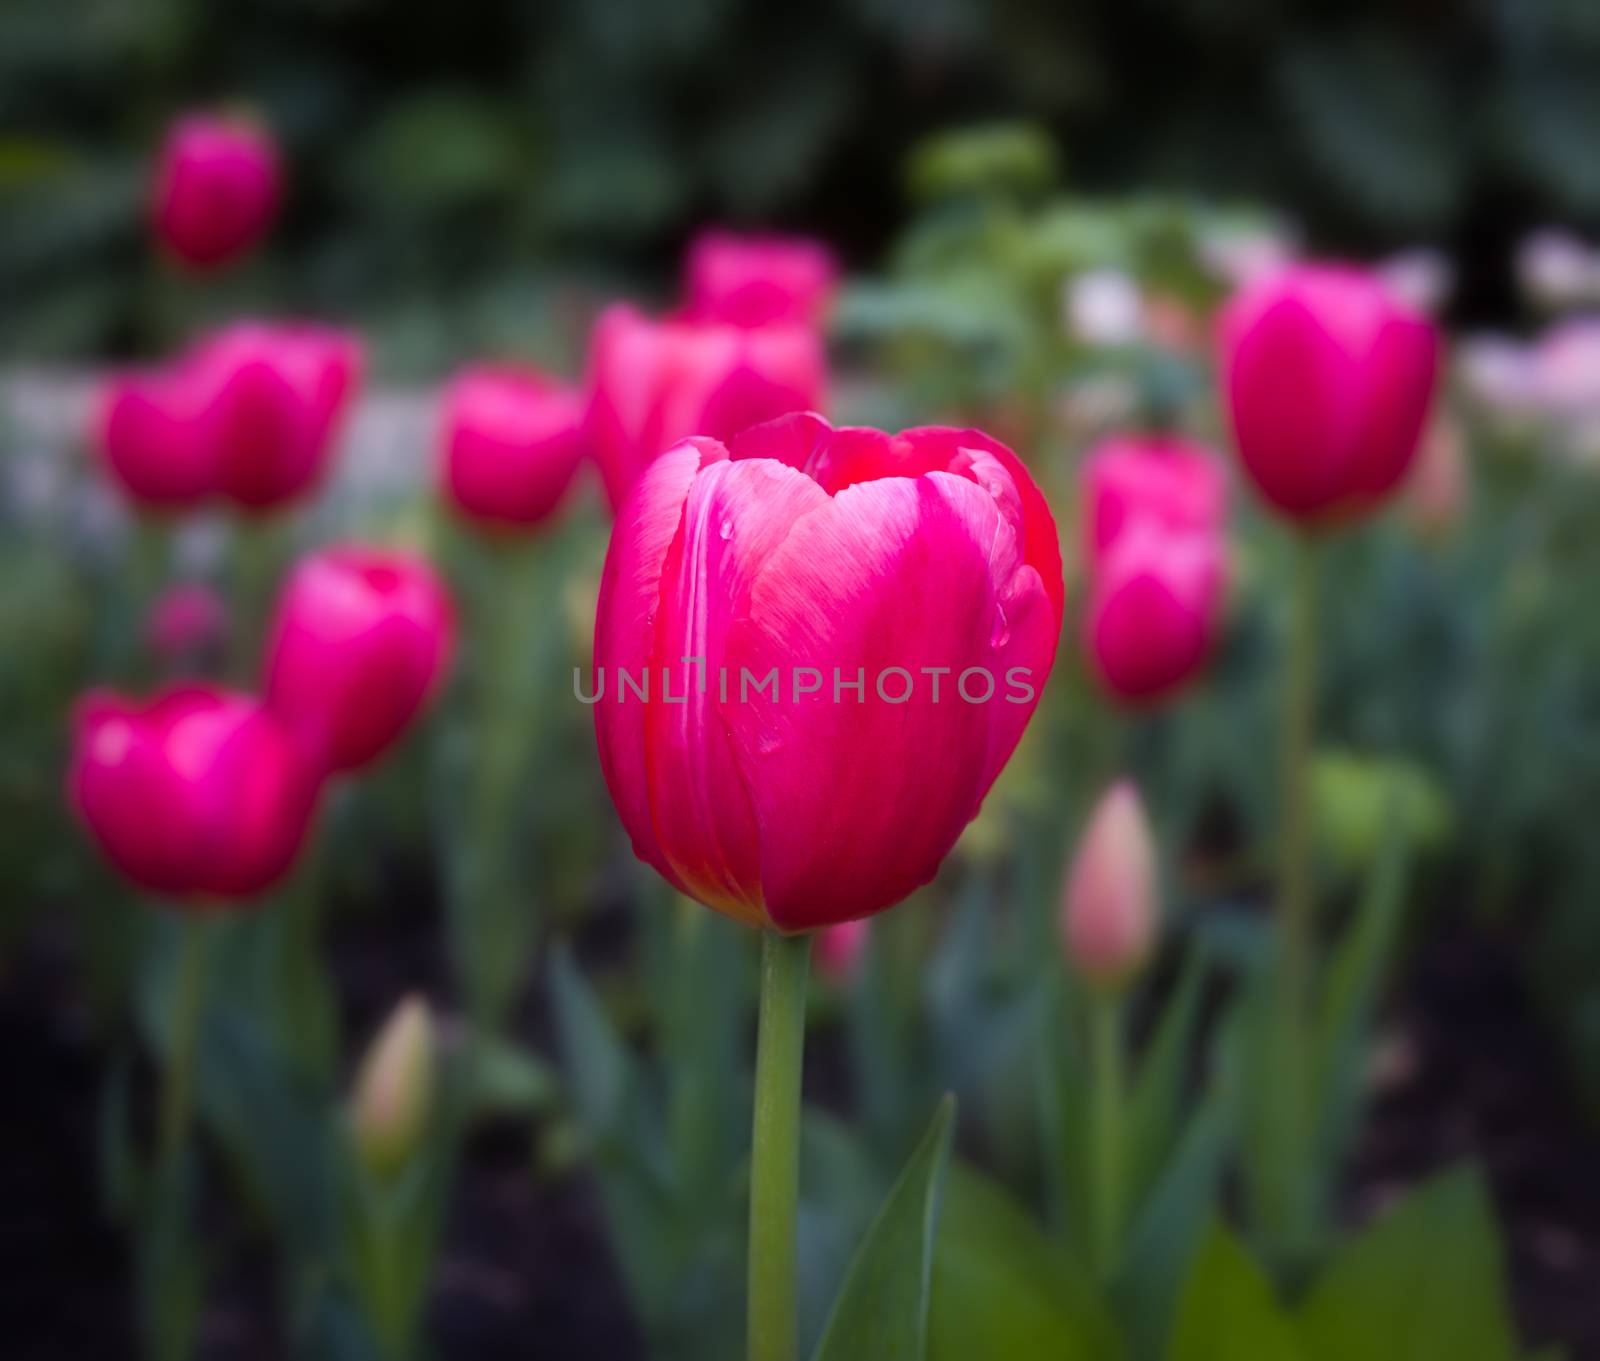 Grouping of pink tulips with drops of rain.